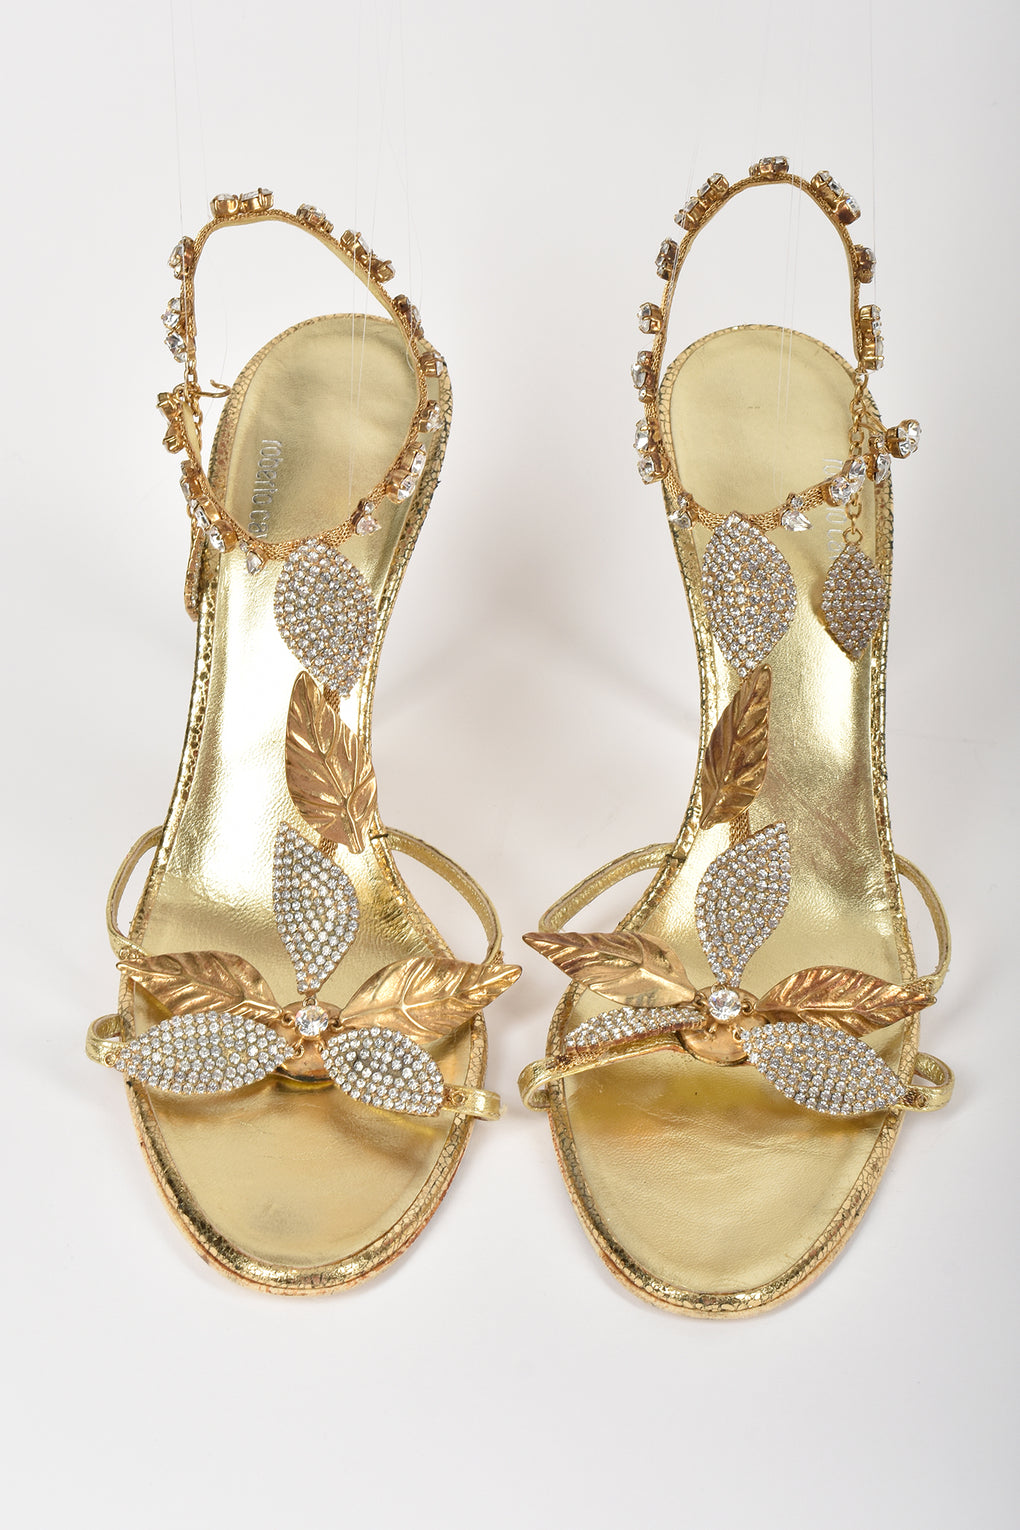 ROBERTO CAVALLI crystals gold leather shoes / 41